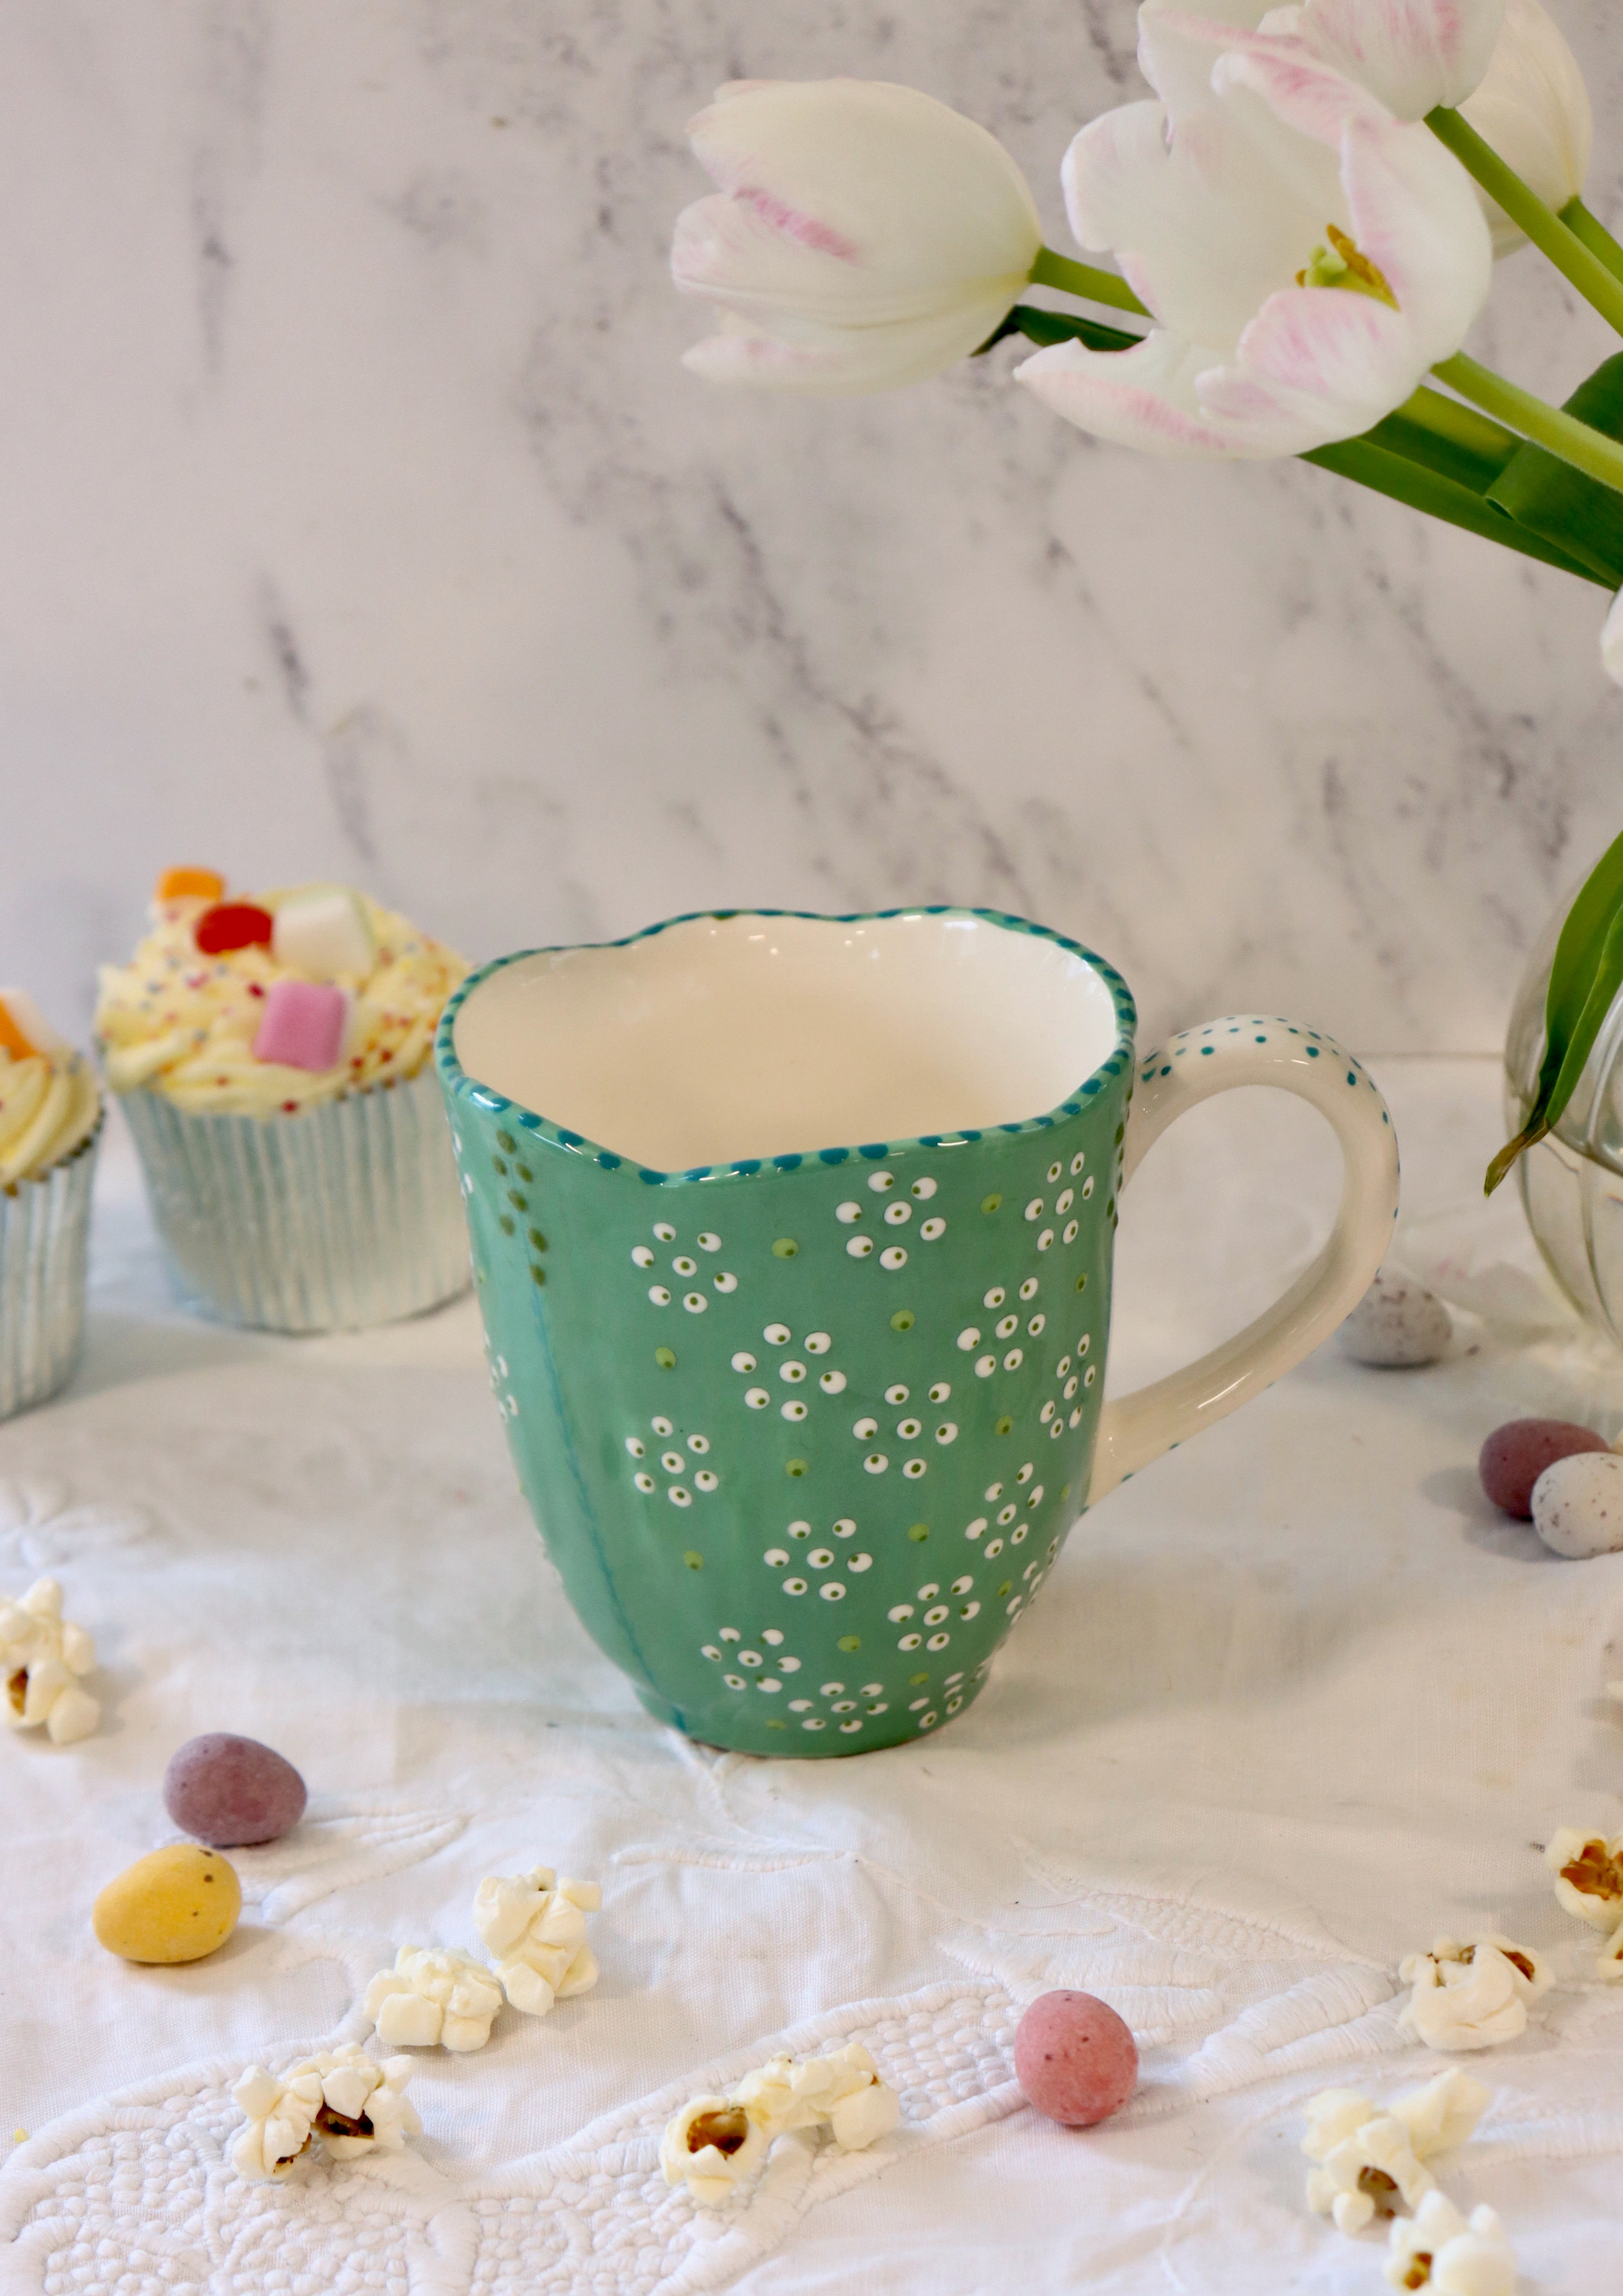 Waterlily Mug - Teal with White Flowers